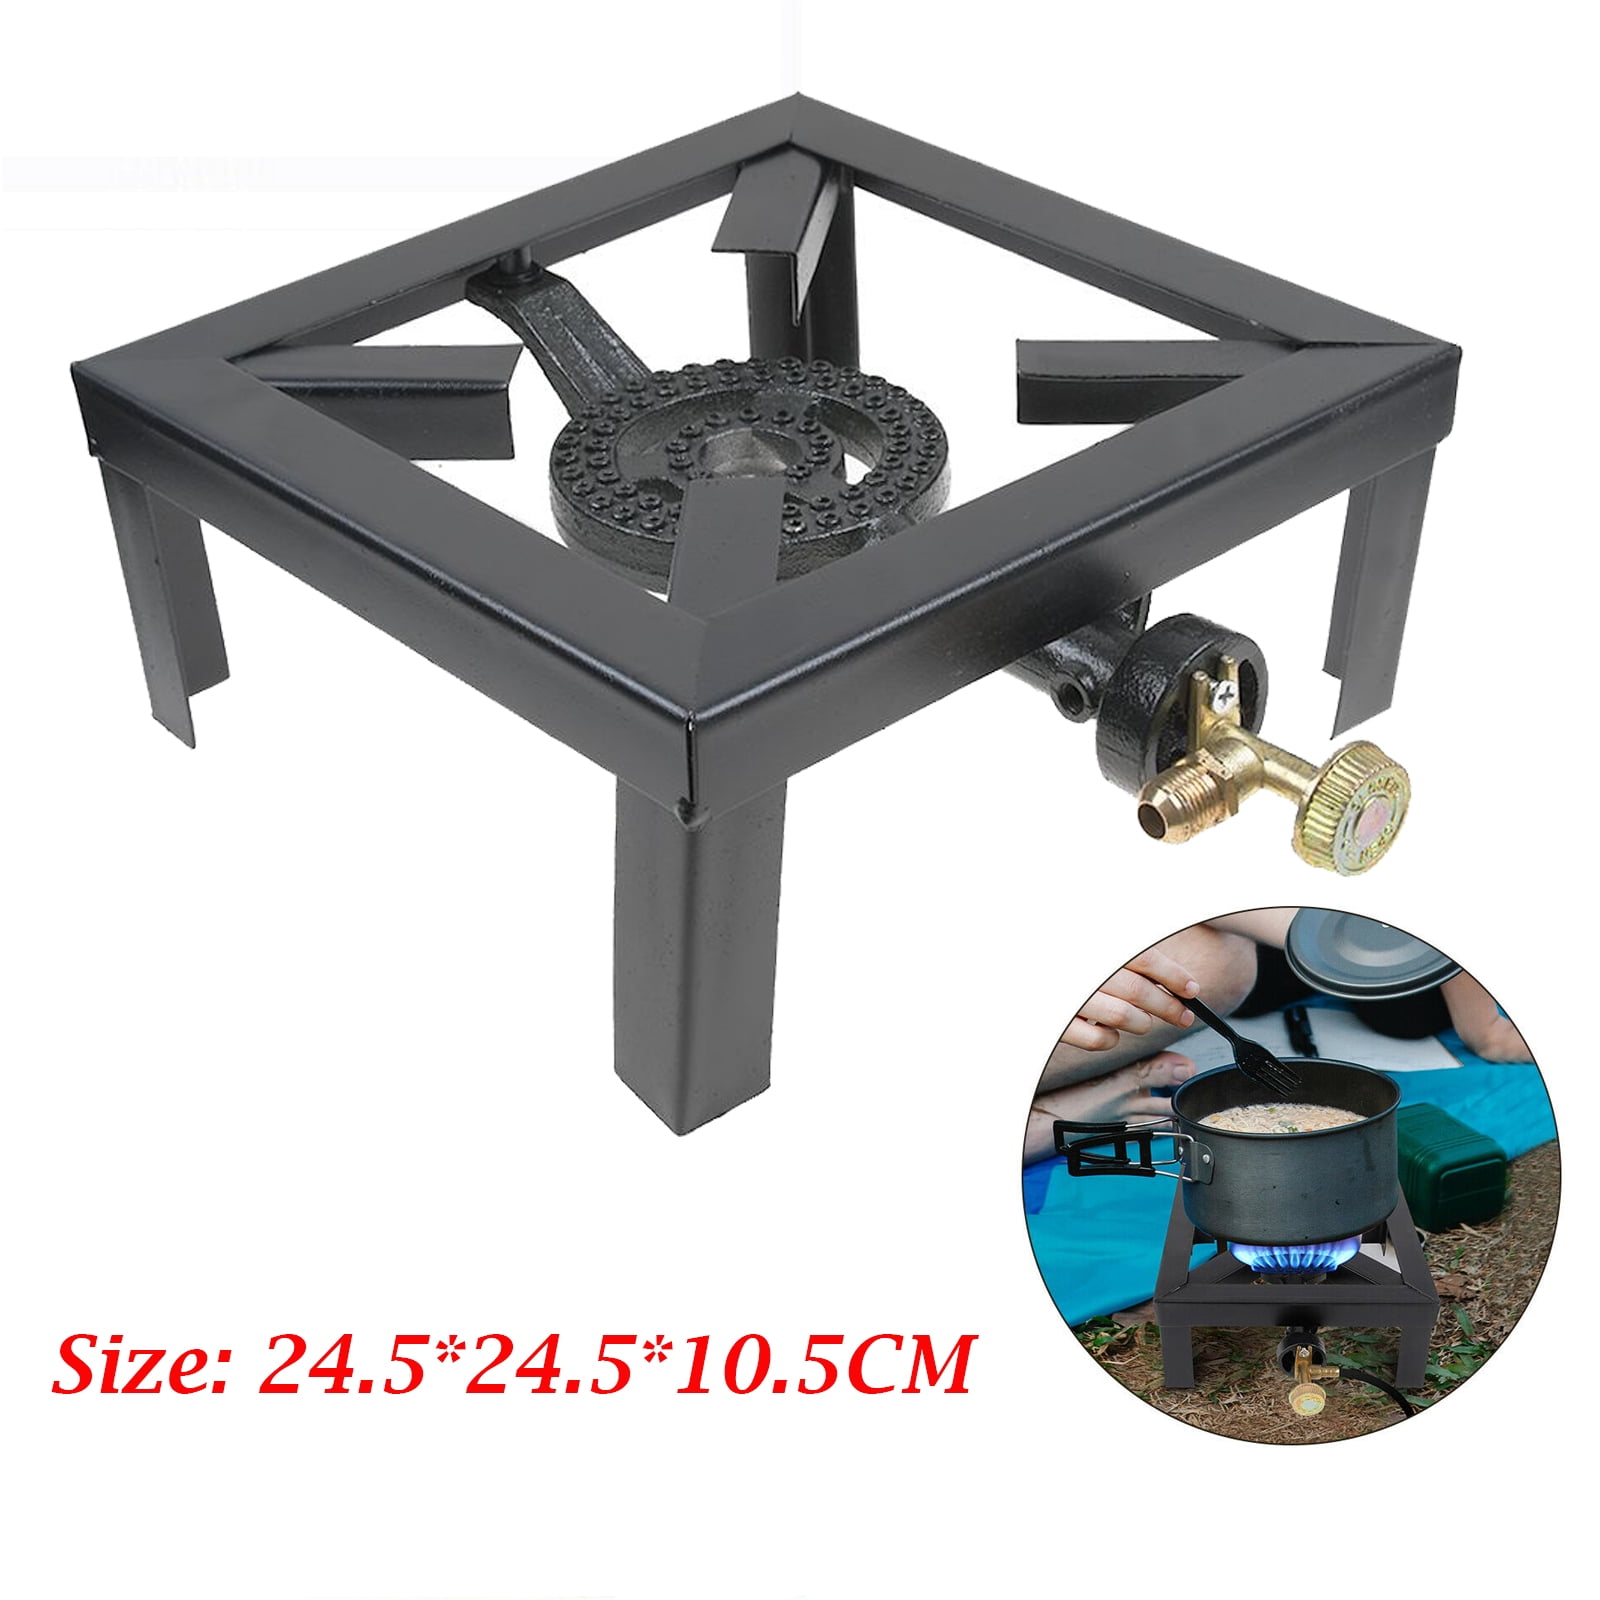 LPG Gas Stove Cast Iron Cooker for Camping Catering Restaurant Gas Burner Home 